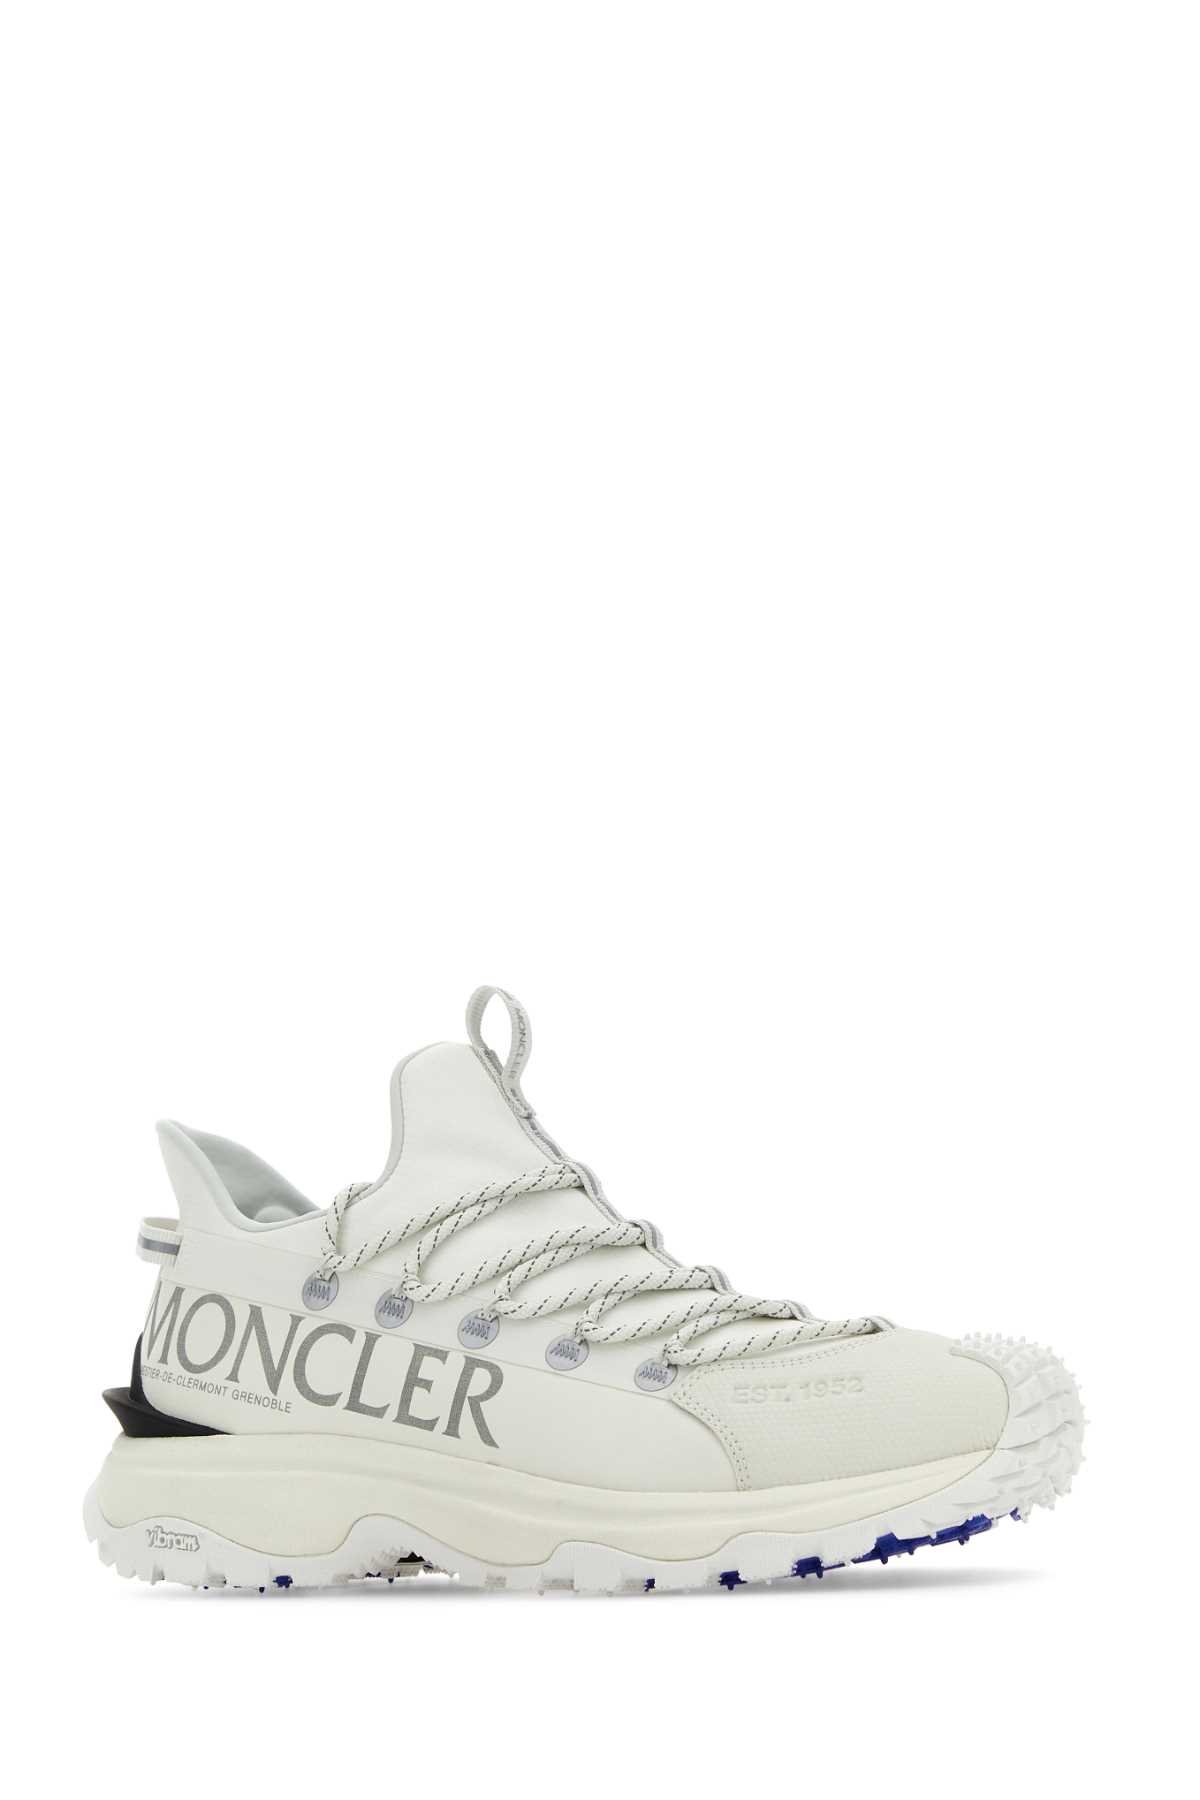 Moncler White Fabric Tailgrip Lite 2 Trainers In 001